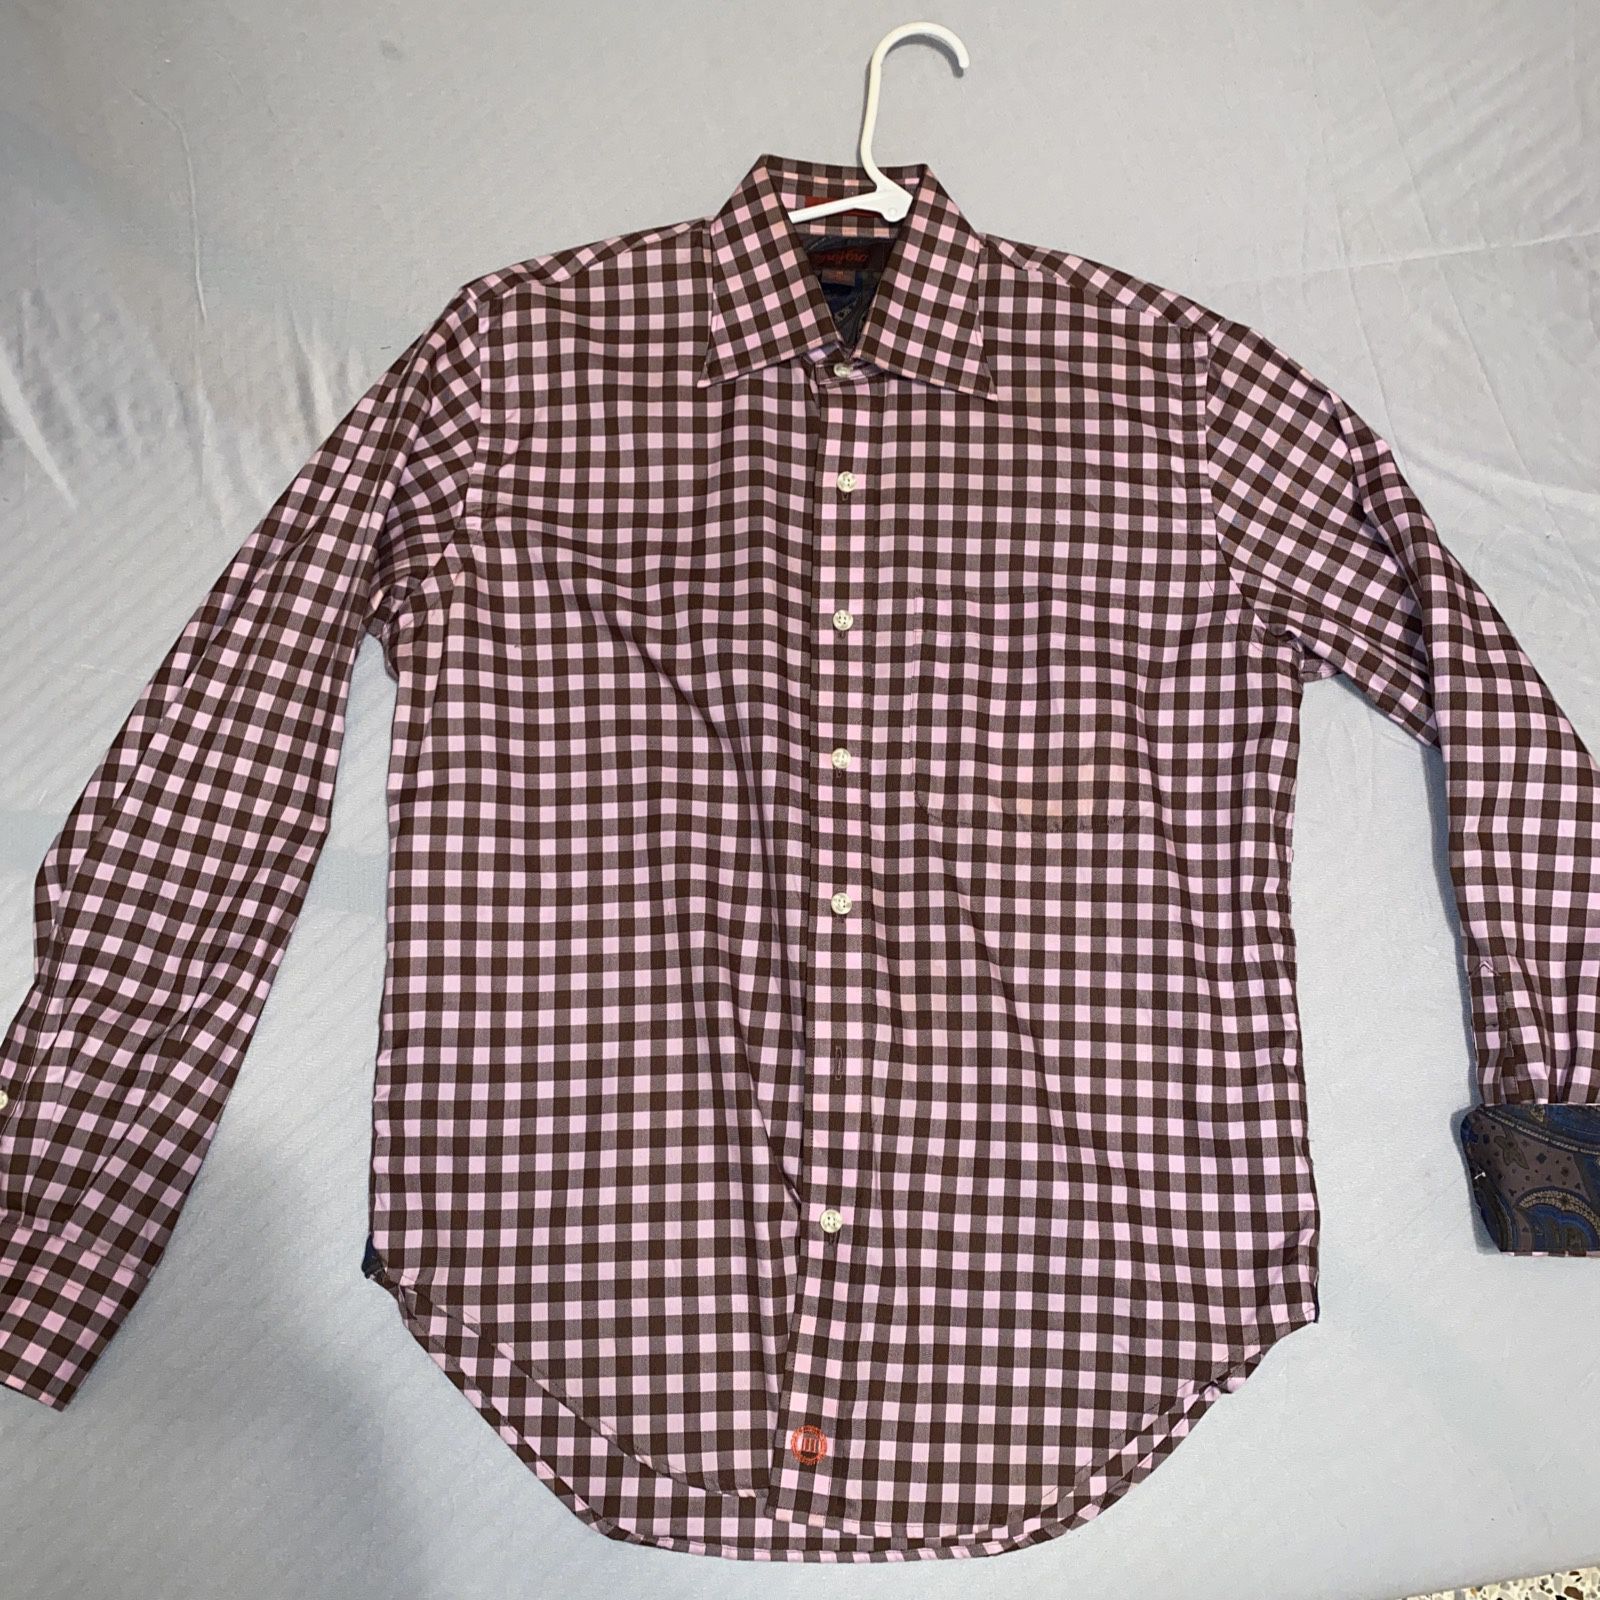 Trevero PURPLE Plaid Button Up Long Sleeve Cotton Collared Shirt Men's Sz M   1 owner used about 4 time’s excellent condition  Italian brand beautiful